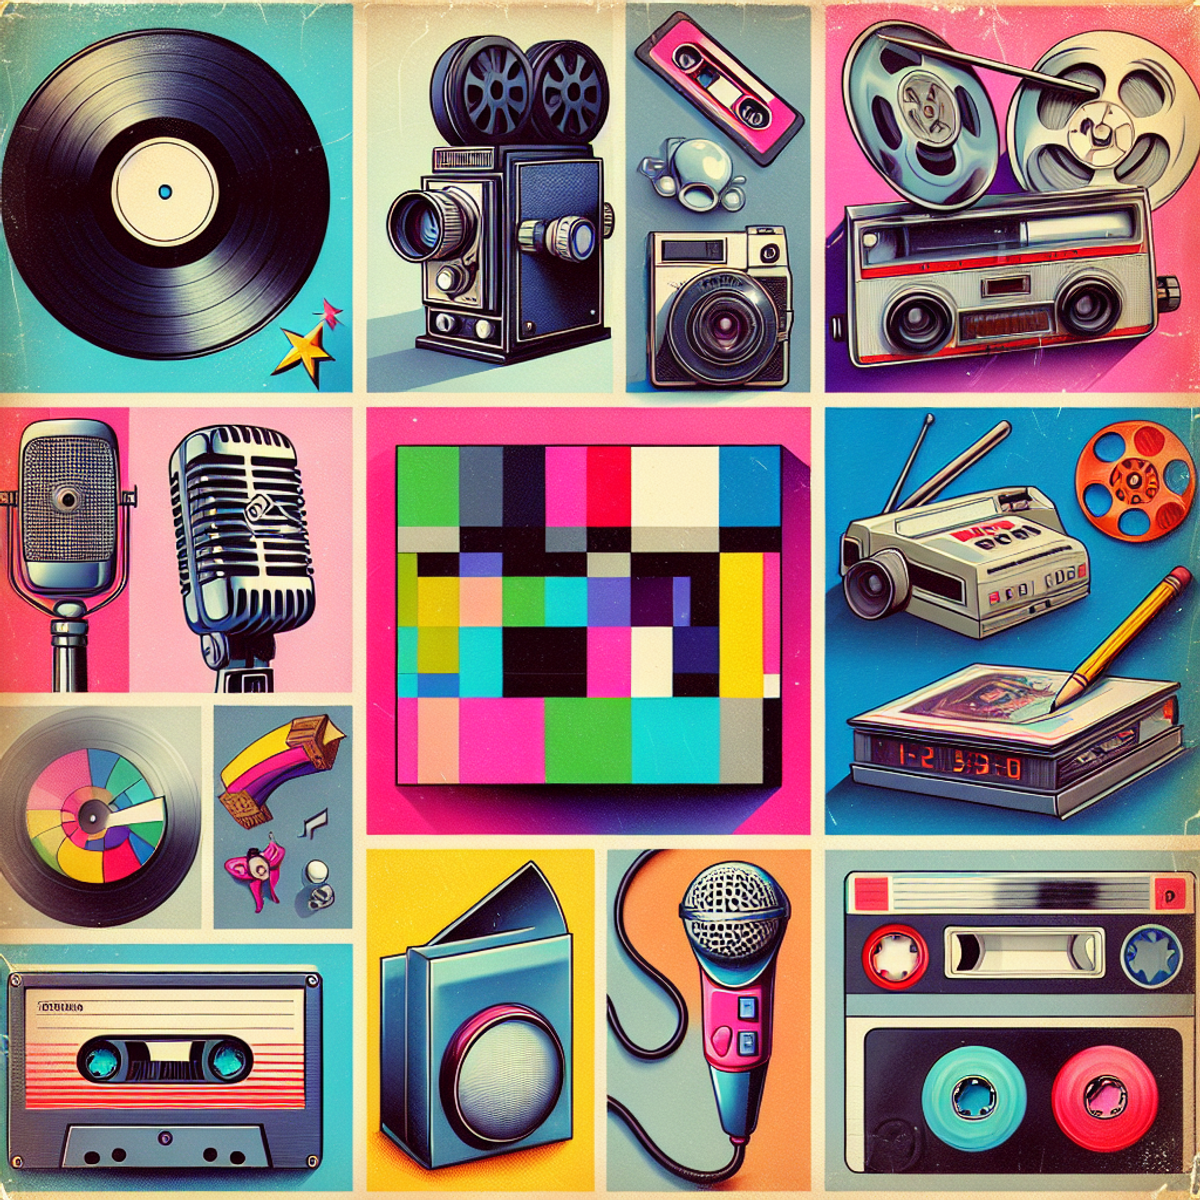 A vibrant collage with vintage vinyl records, antique movie camera, cassette tapes, rotary dial telephone, 8-bit video game joystick, non-identifiable comic strip, and a classic microphone in bright colors with a hint of pastel shades.